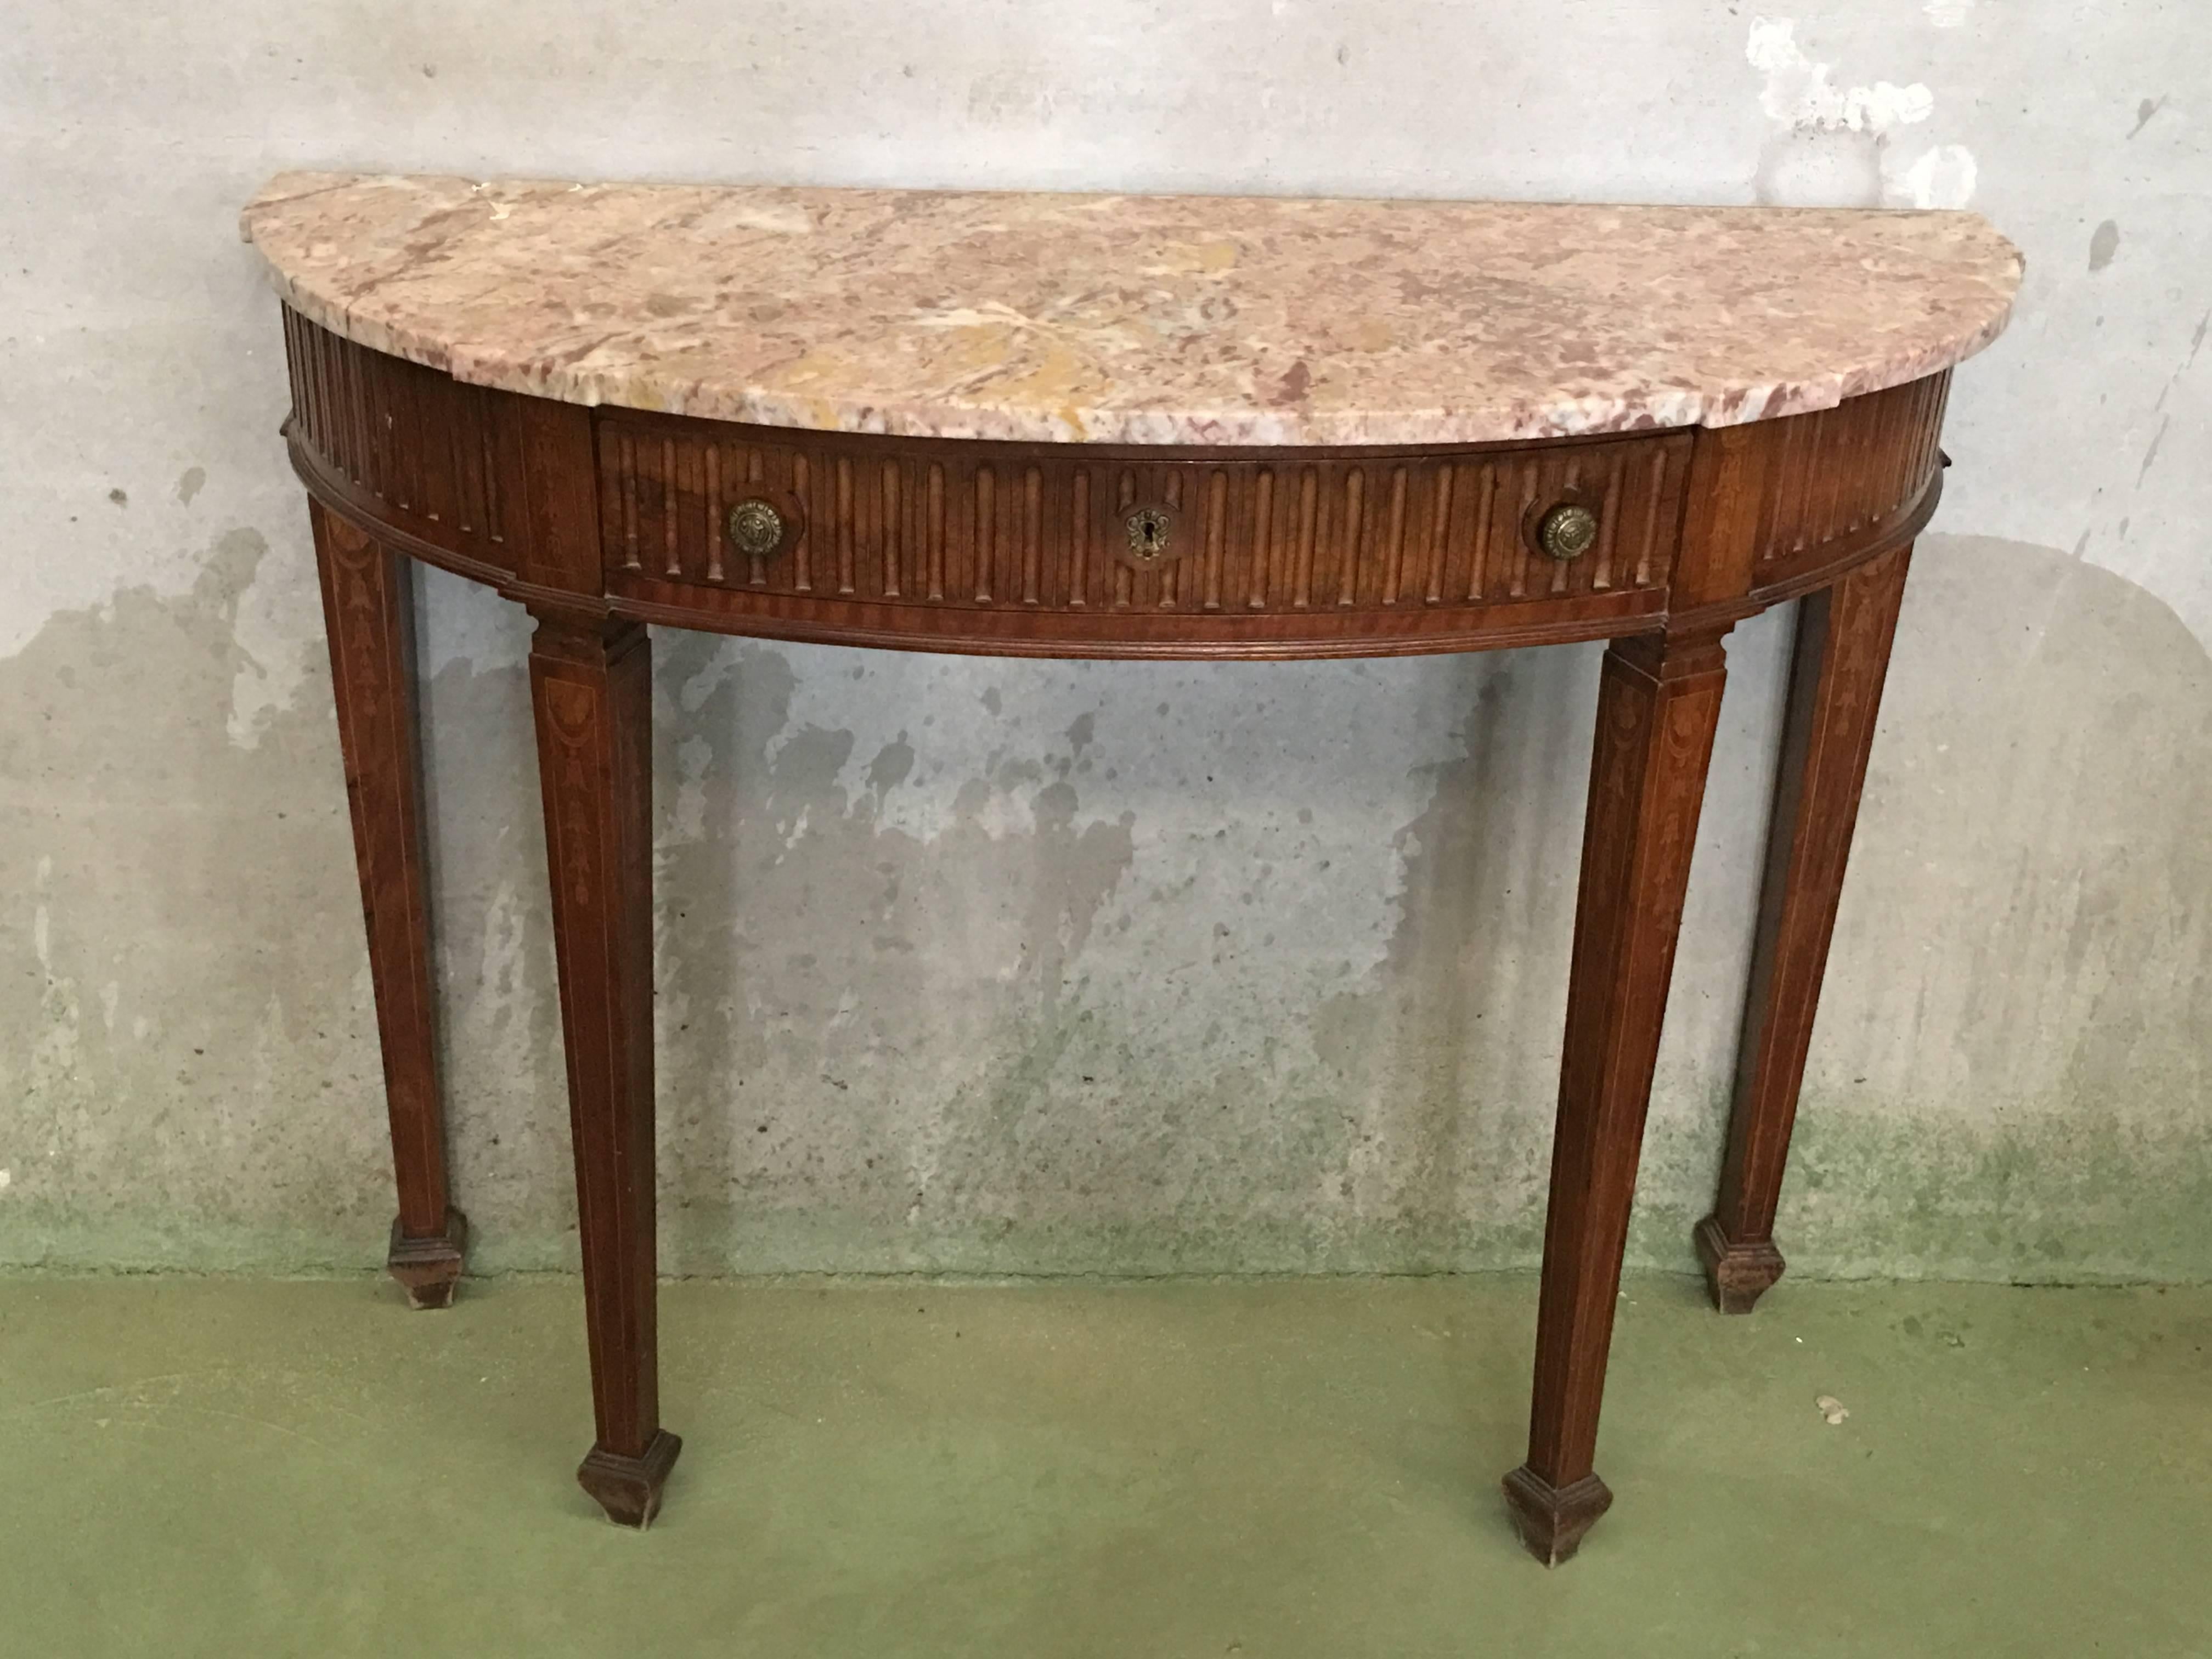 Elegant early 19th century French walnut console table with drawer.